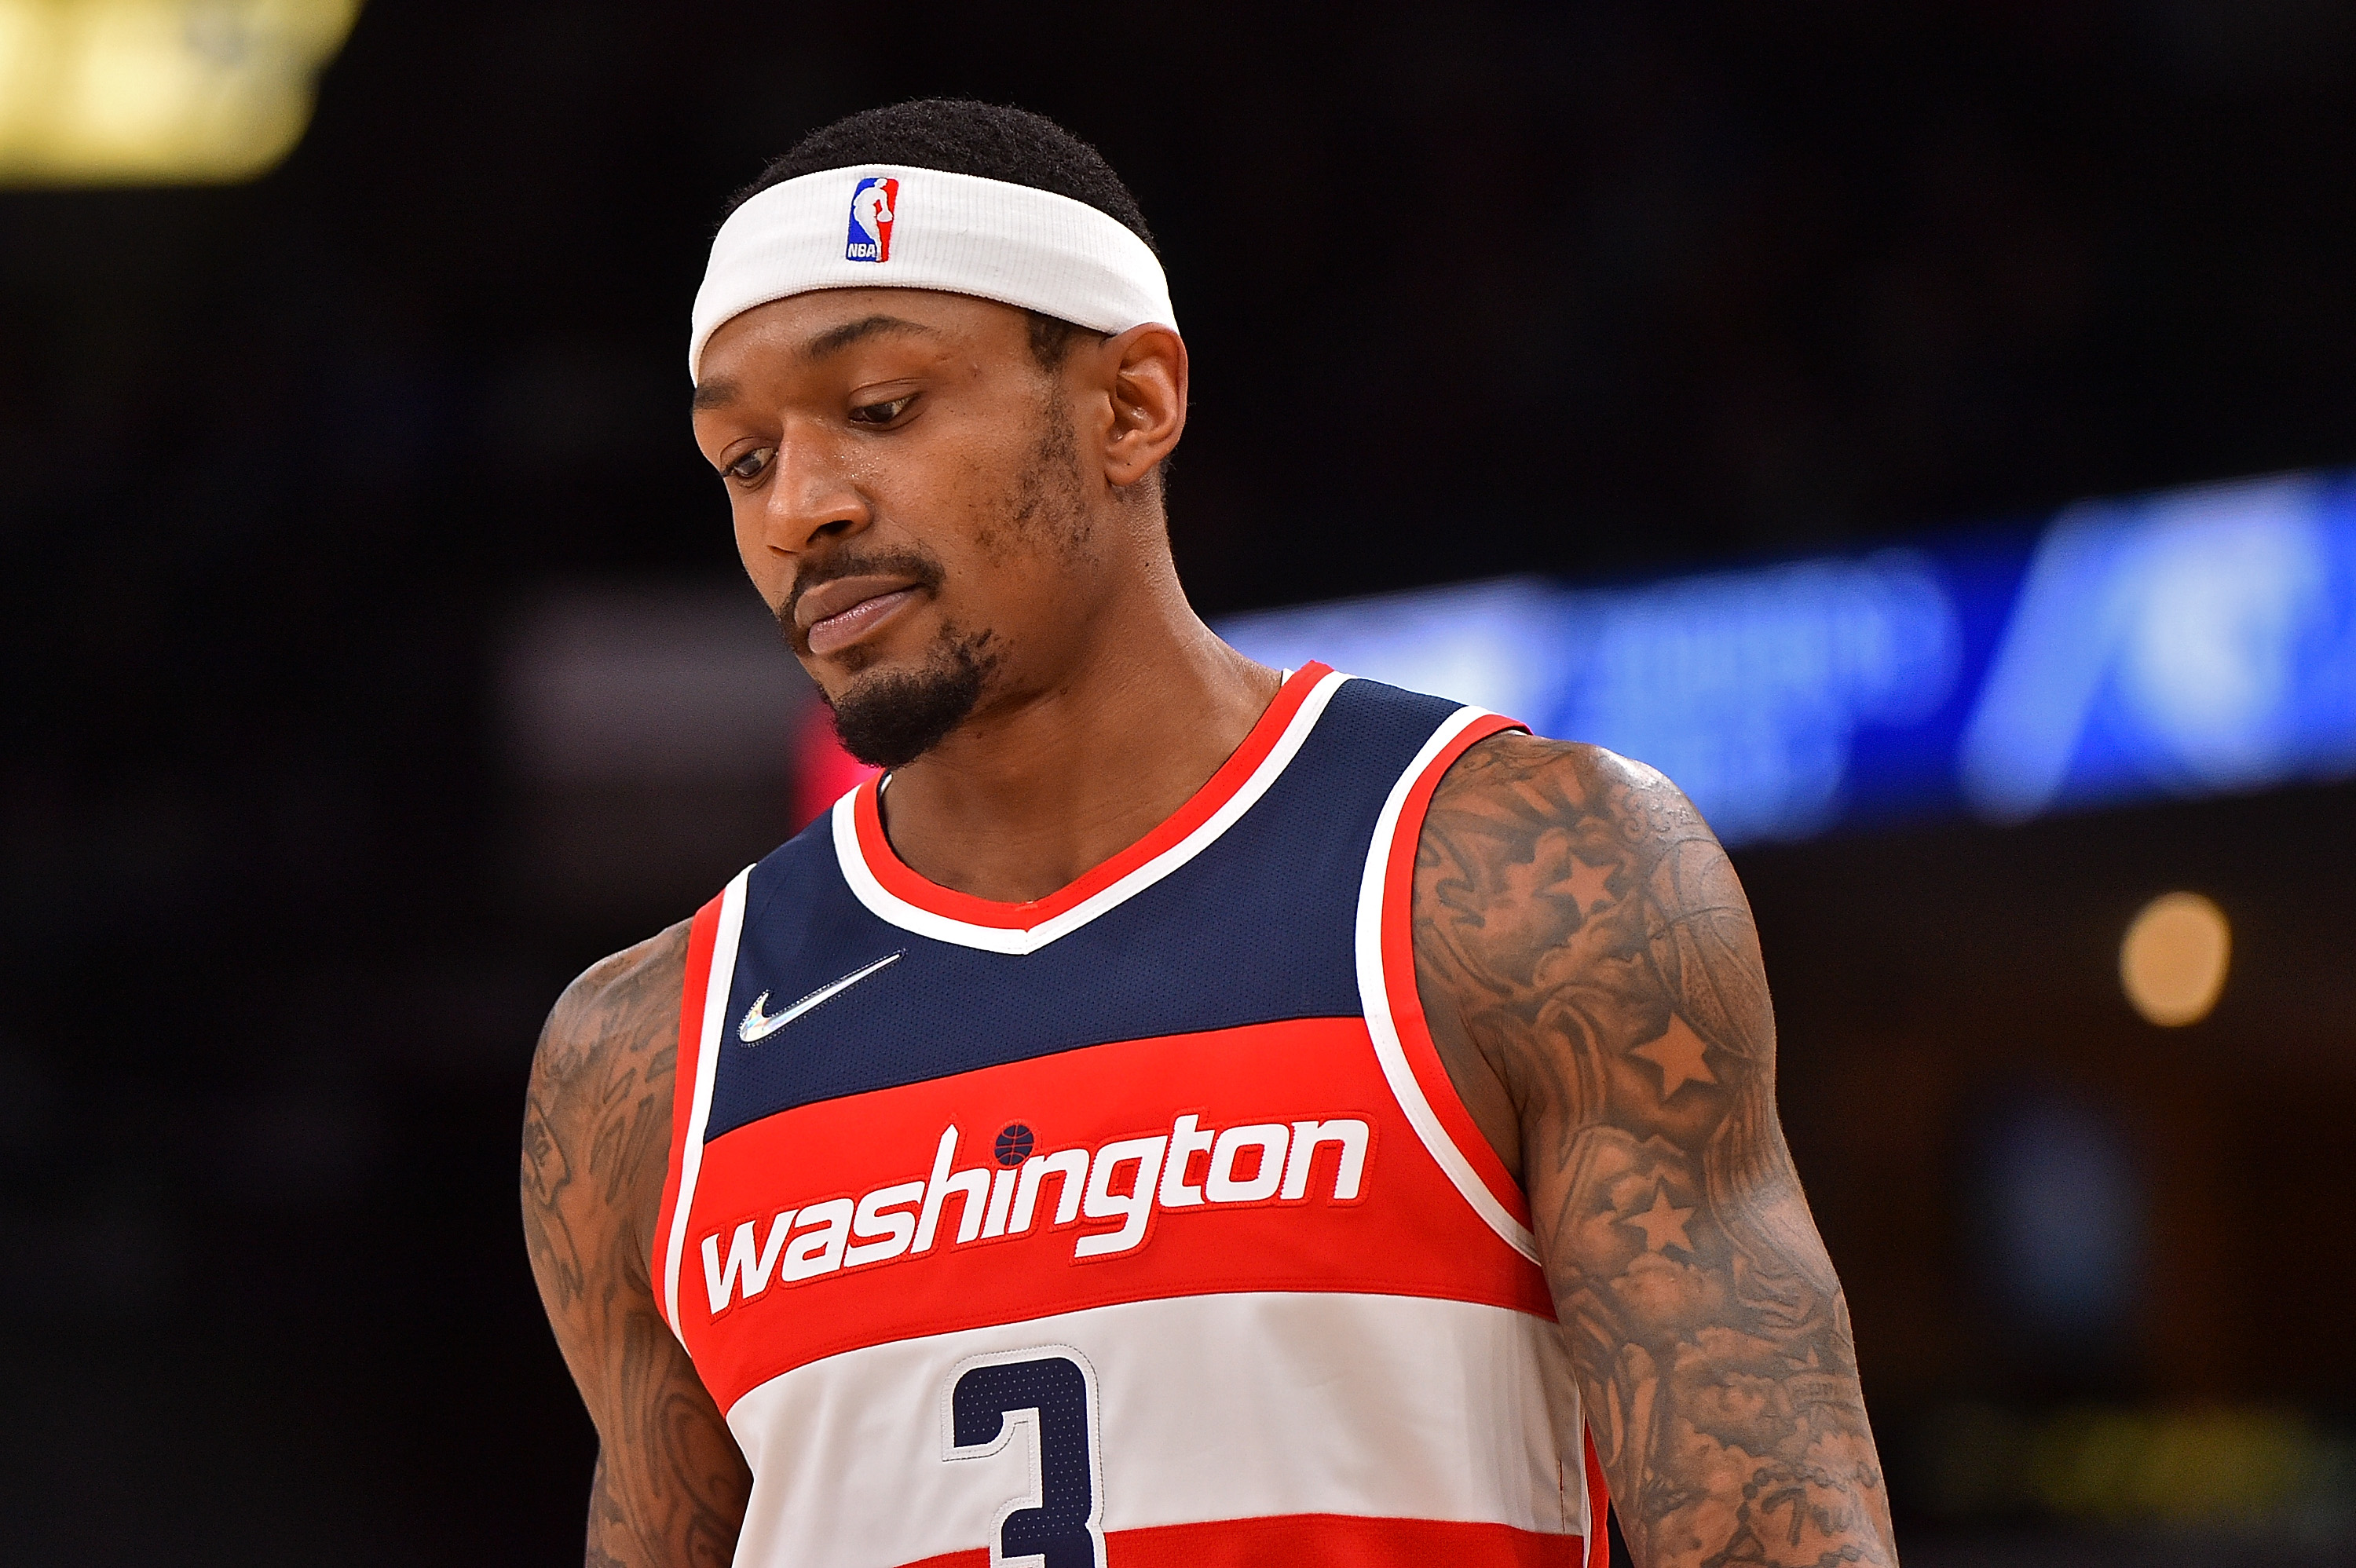 Washington Wizards star Bradley Beal reacts during an NBA game in January 2022